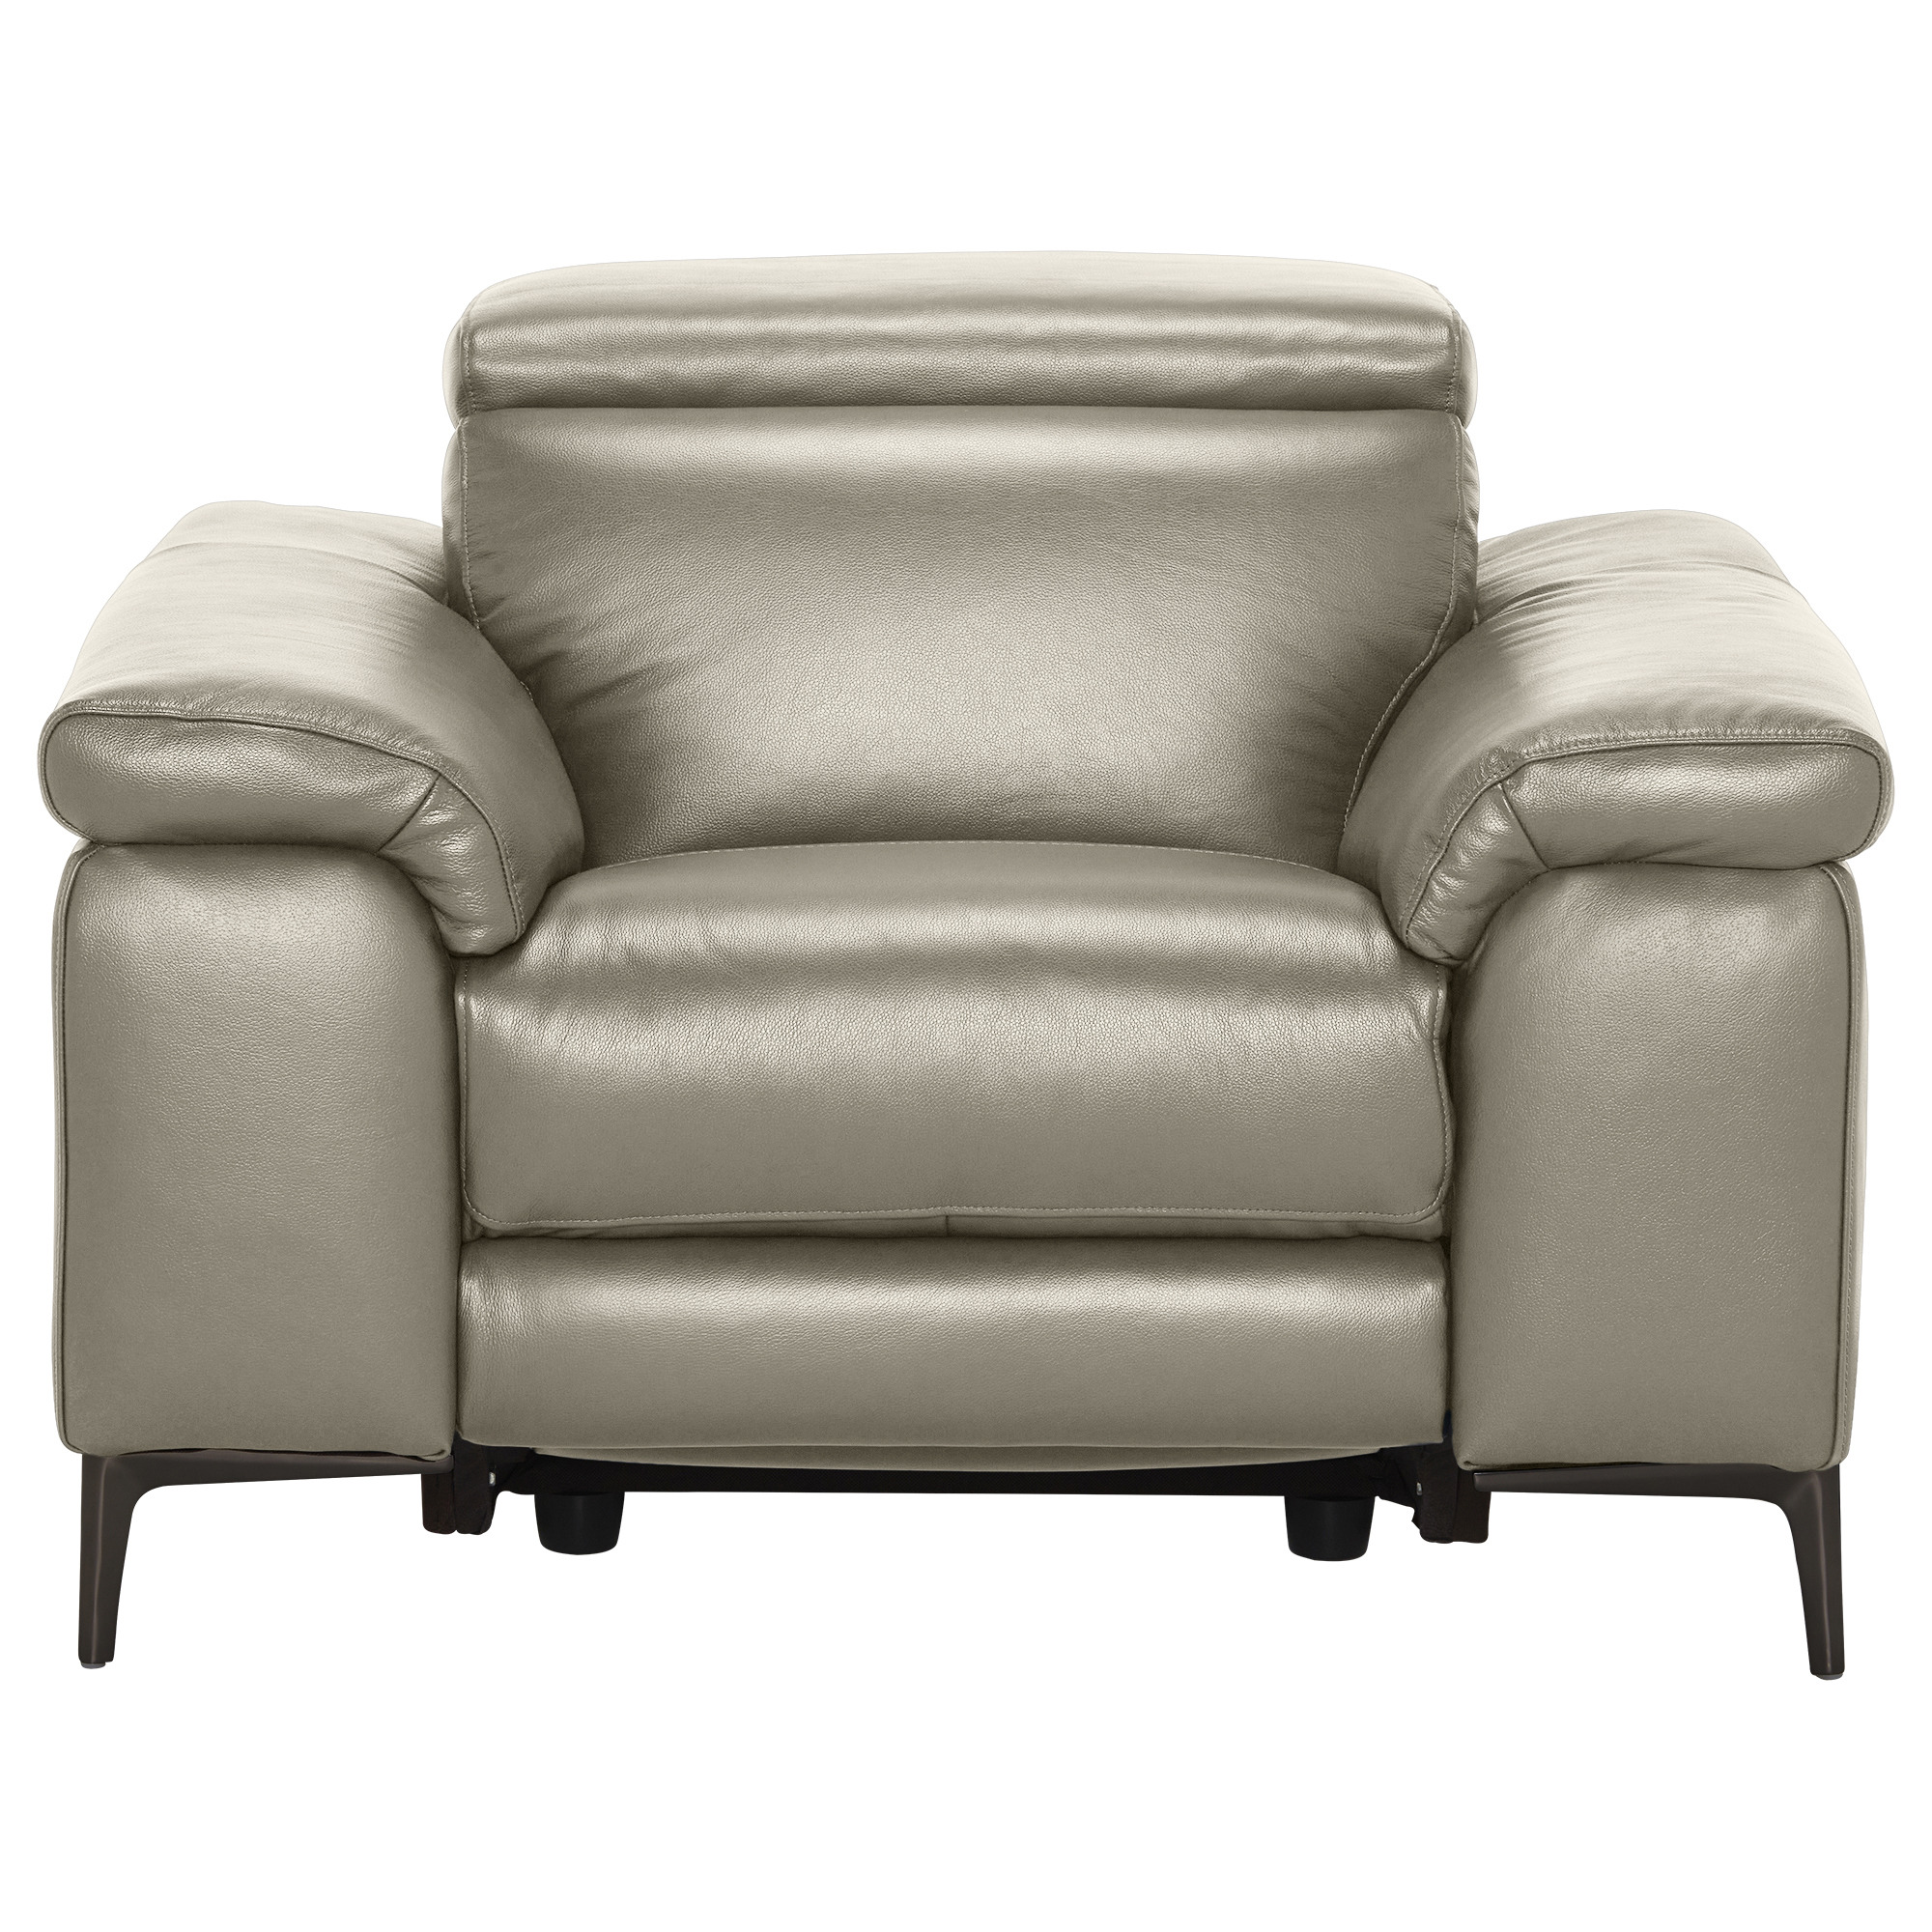 Paolo Electric Recliner Chair With Headrest - Barker & Stonehouse - image 1